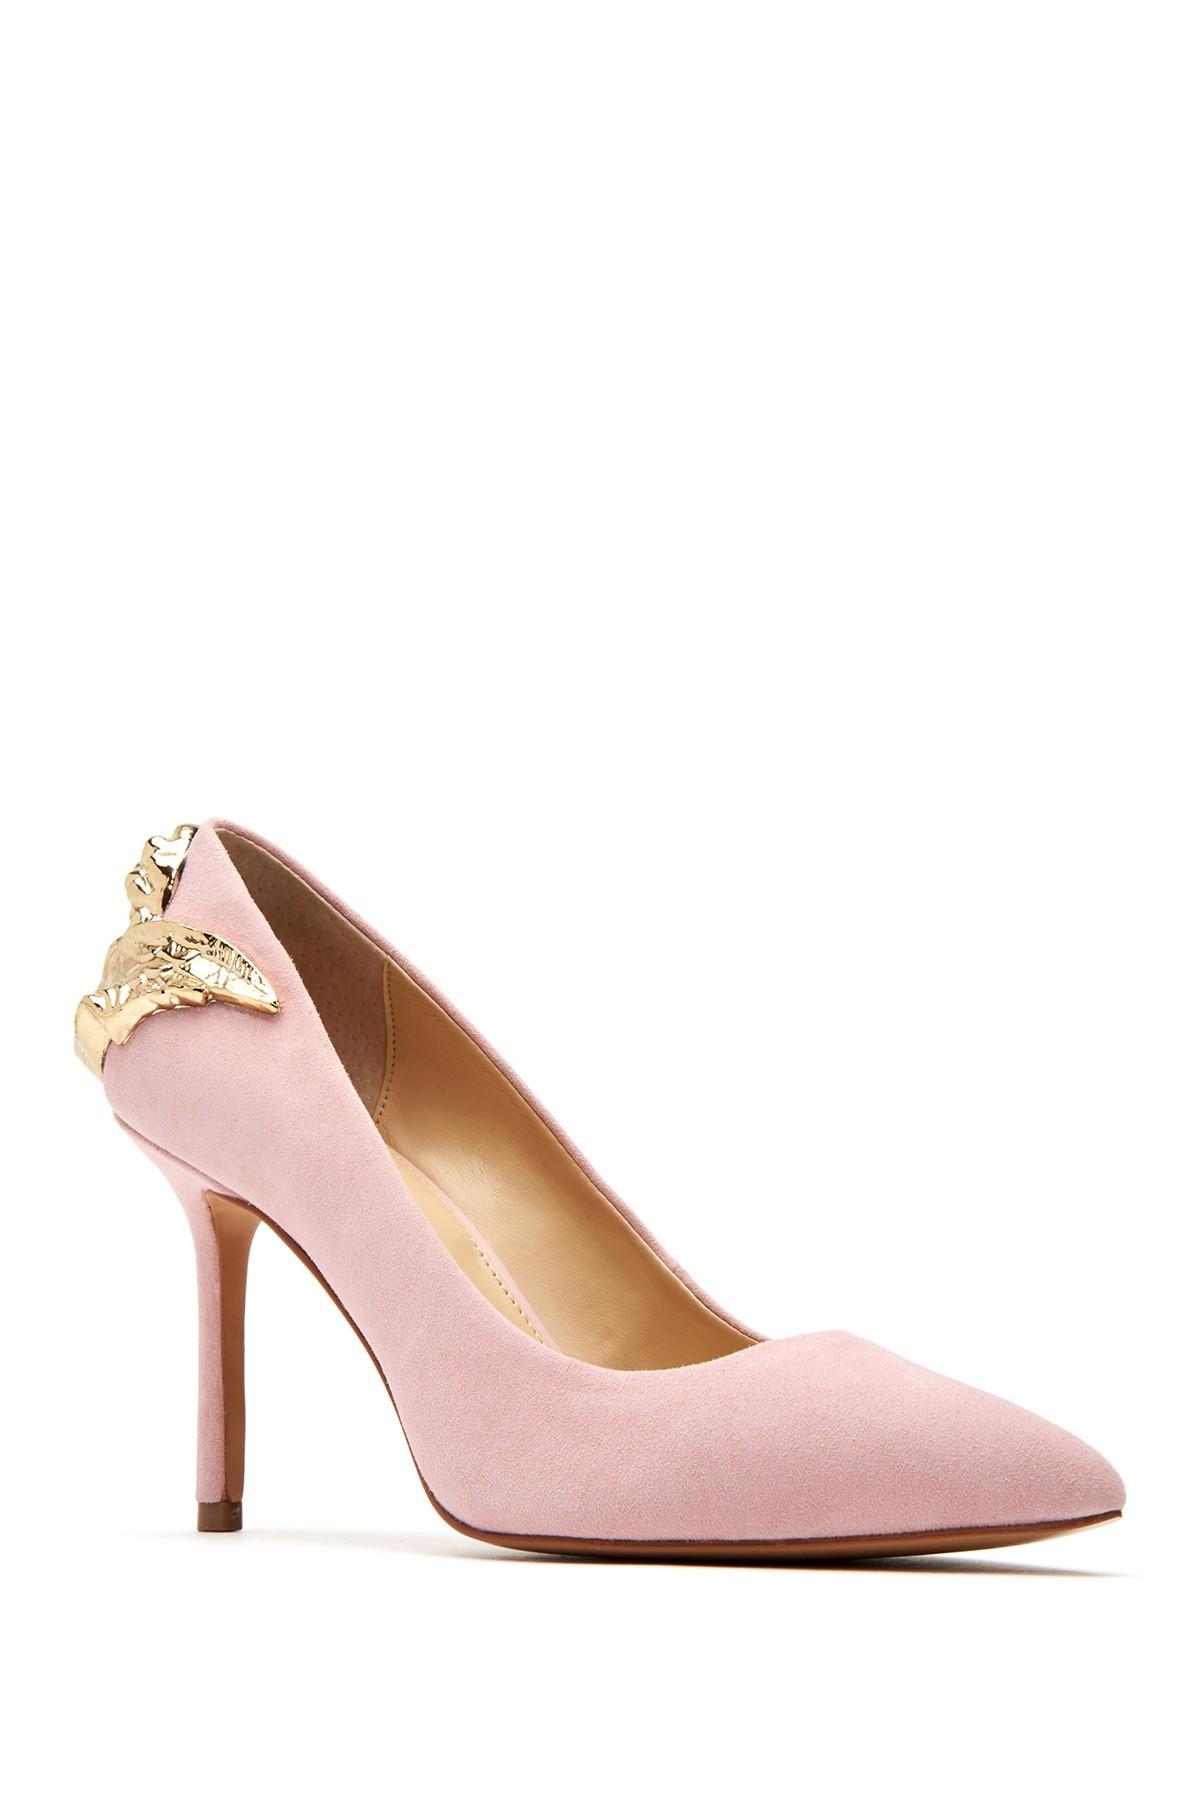 Katy Perry Synthetic The Charmer Stiletto Heel in Rose (Pink) - Lyst